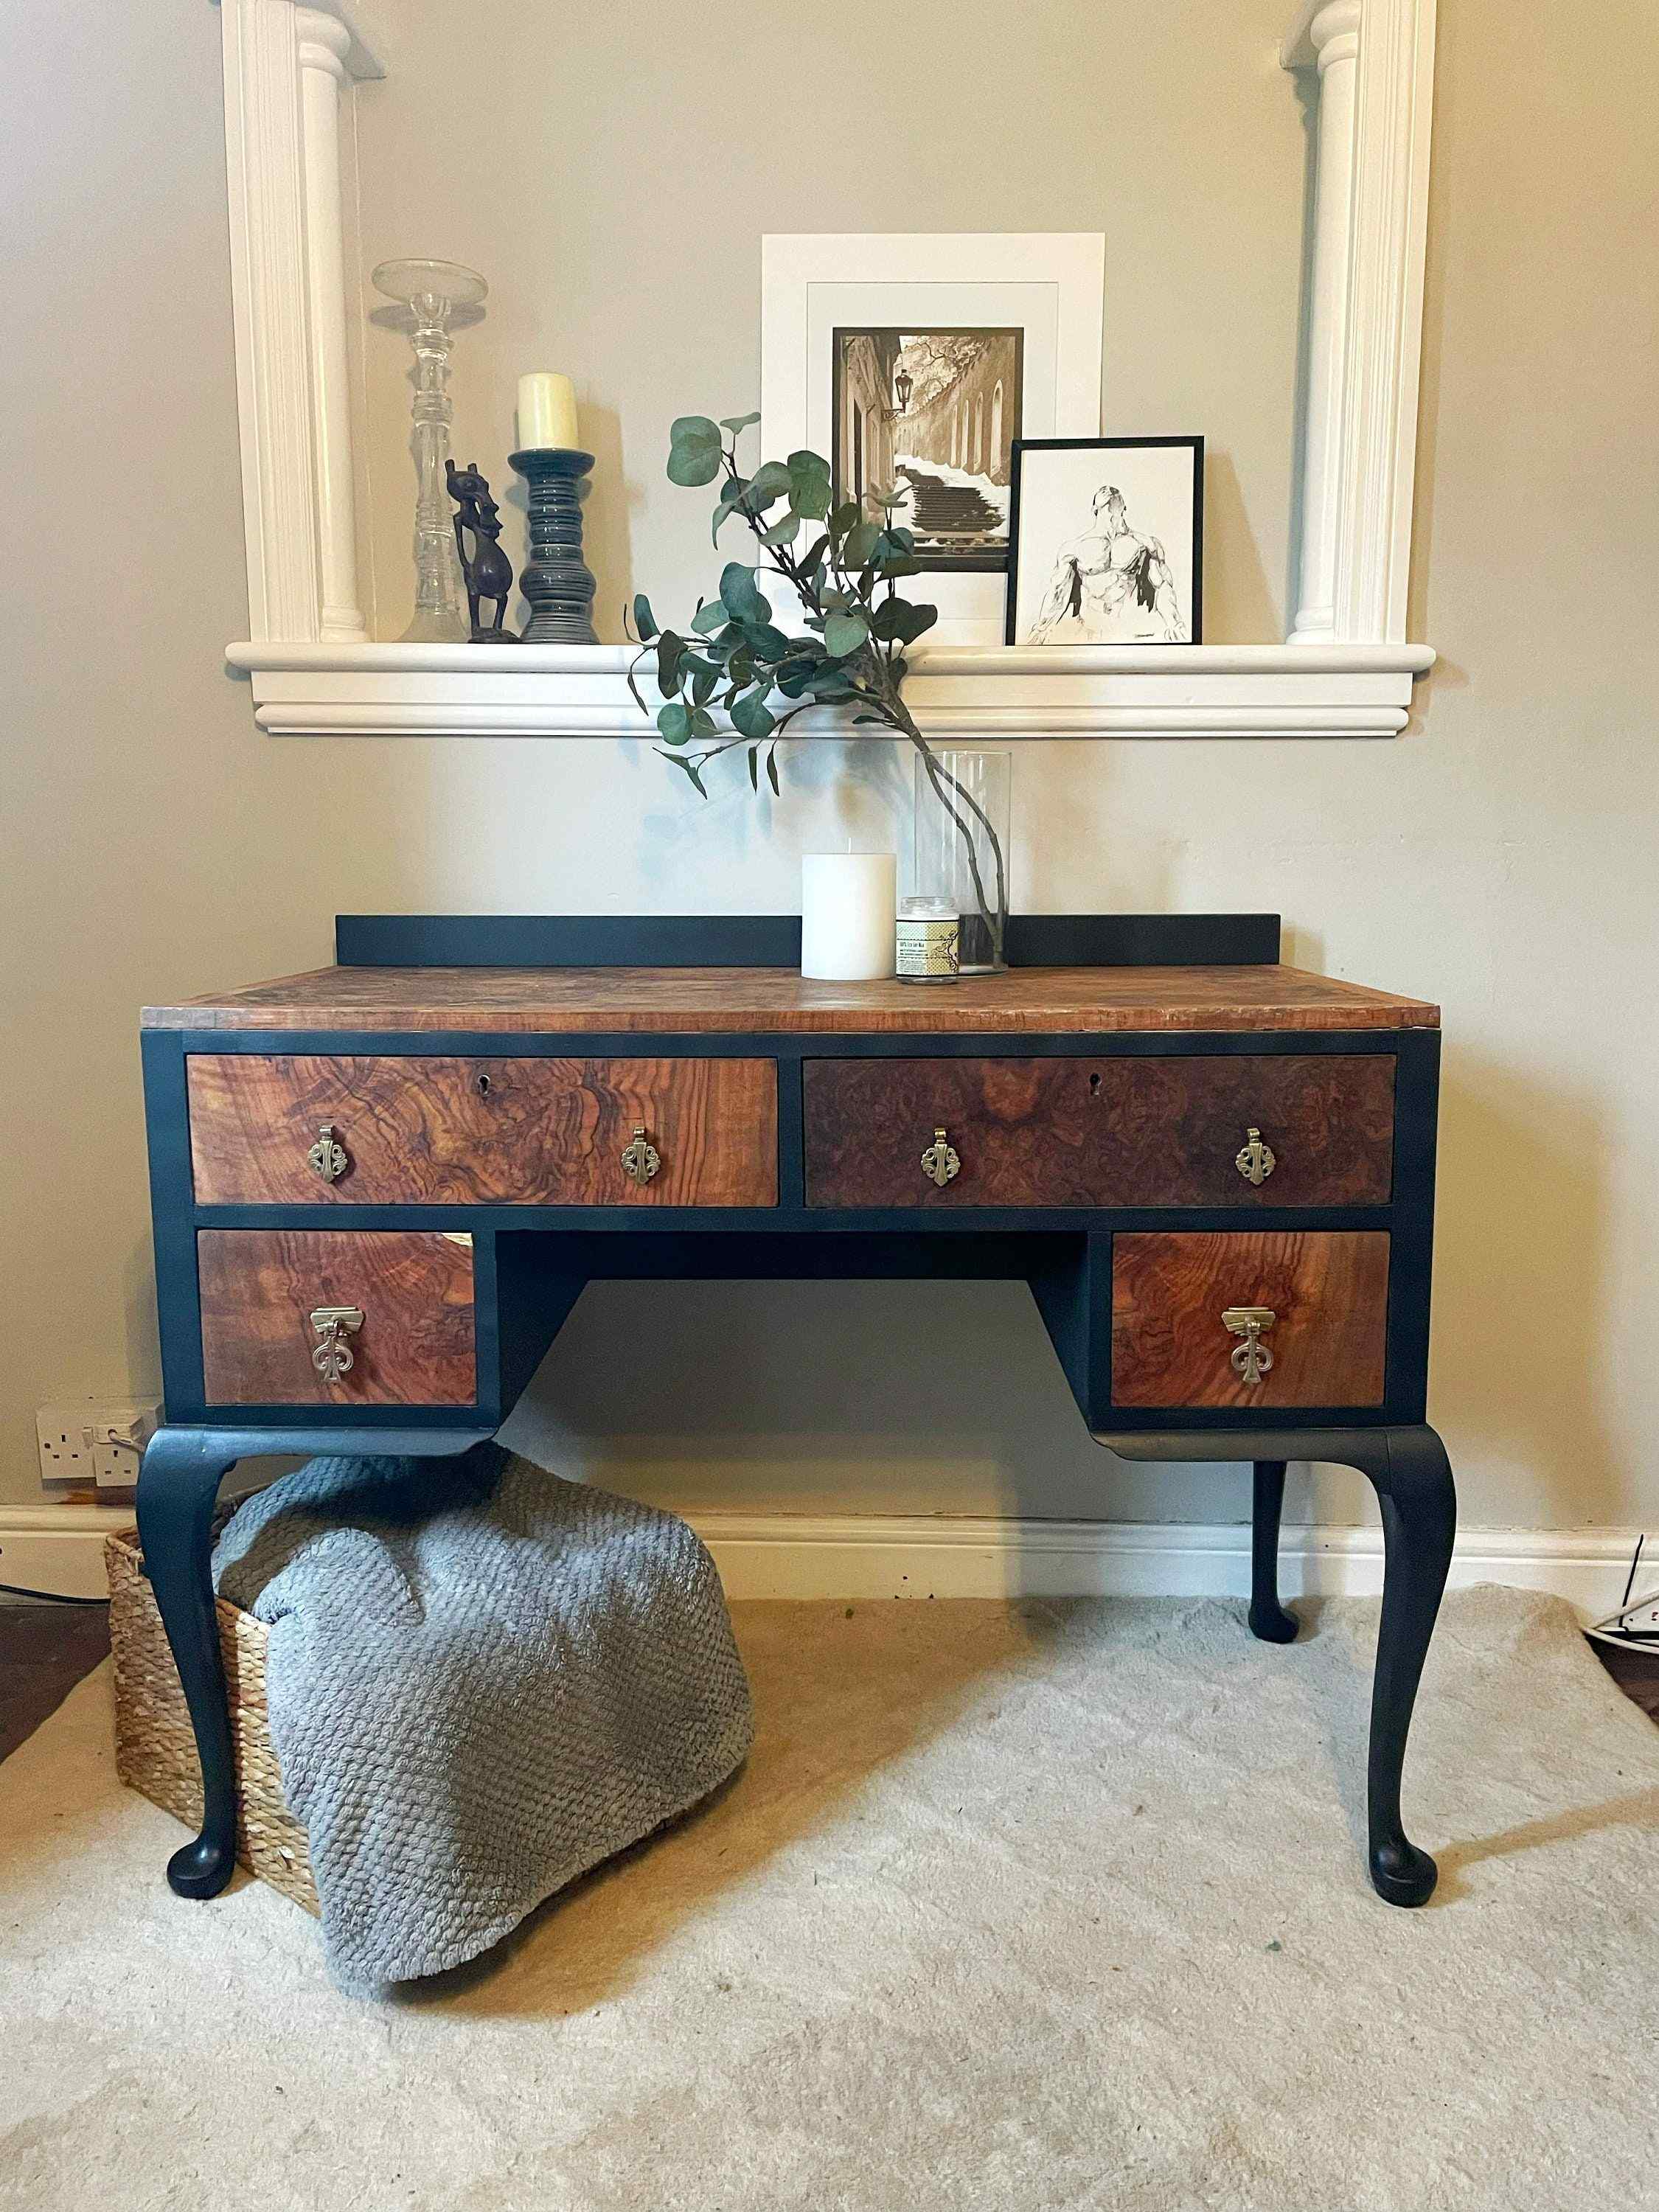 Combine and Contrast dressing table design